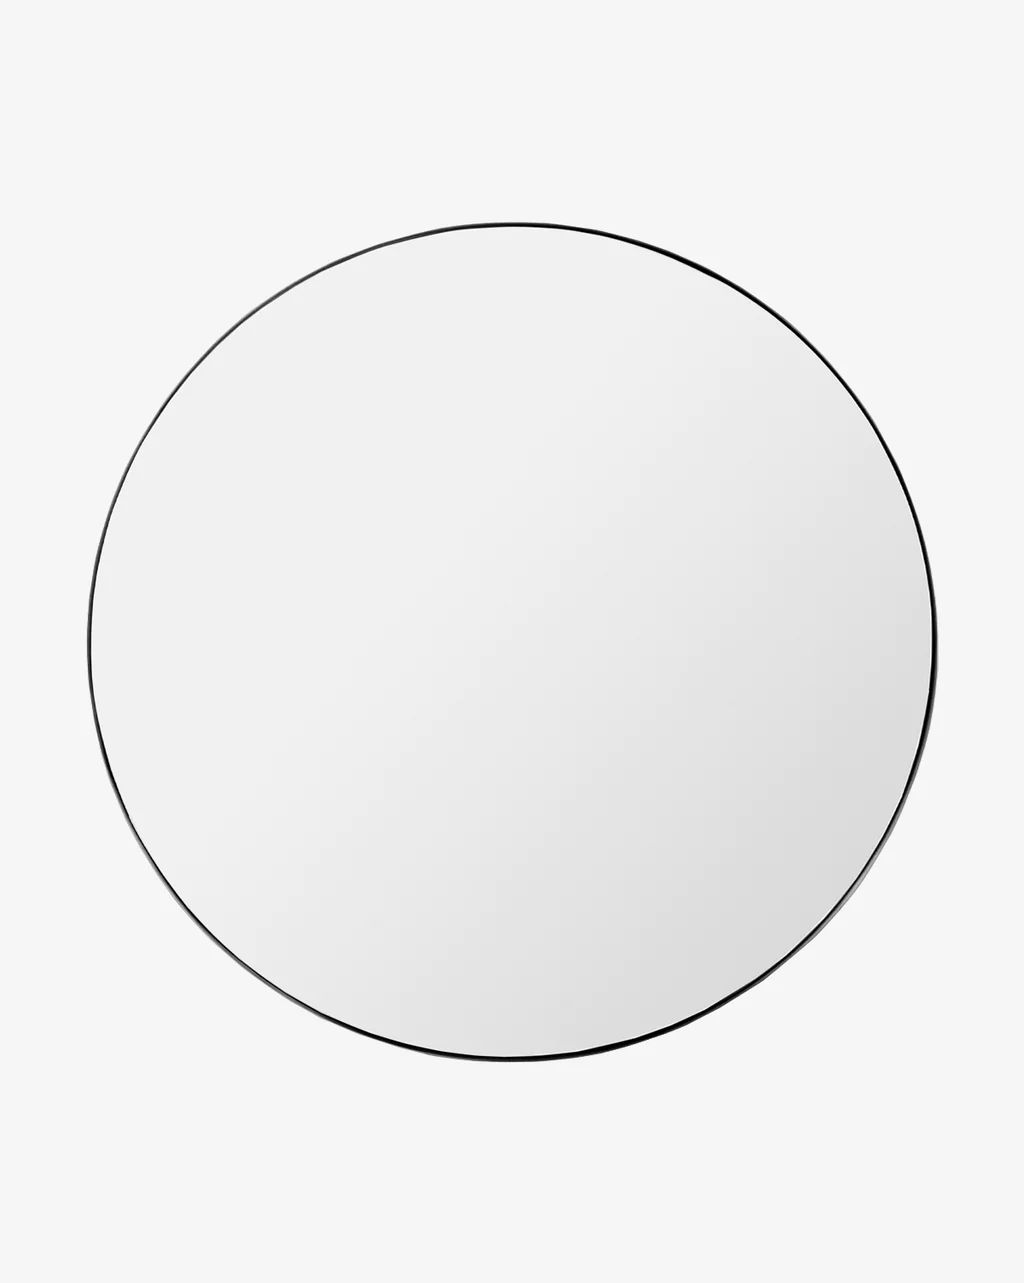 Jace Inset Circle Mirror | McGee & Co.